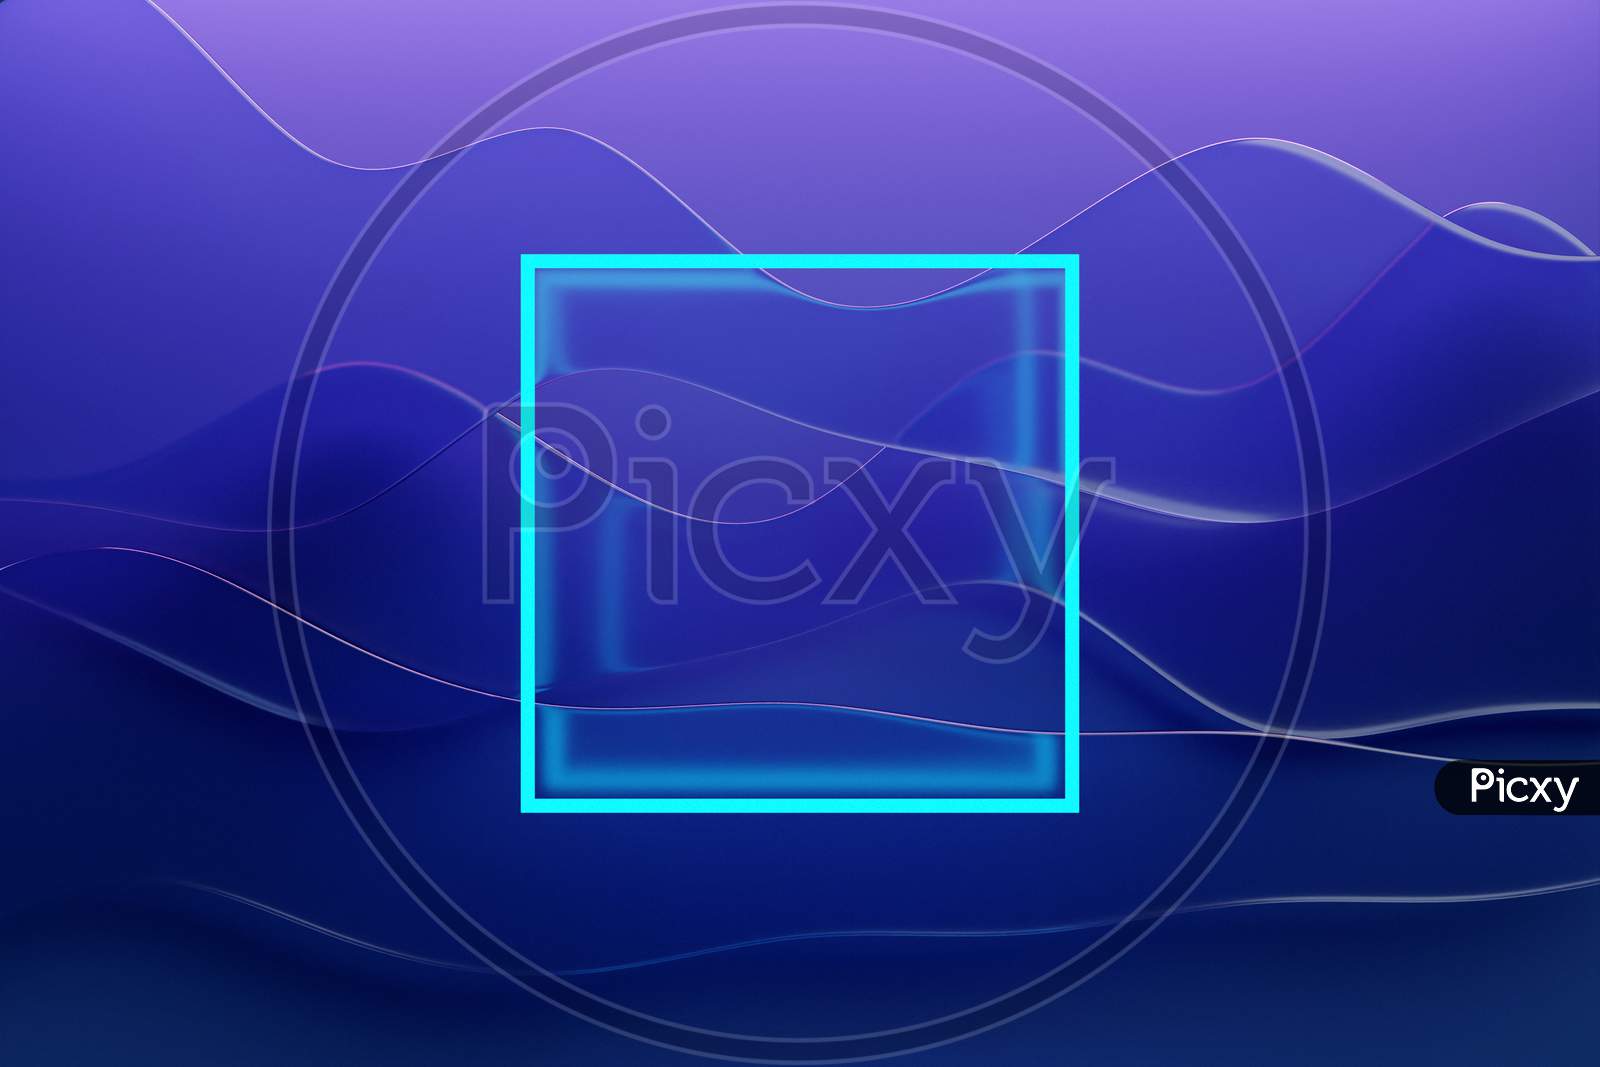 3D Illustration  Of Bright  Blue Neon Square  On Purplewave  Background. 3D Rendering. Minimalism Geometry Background